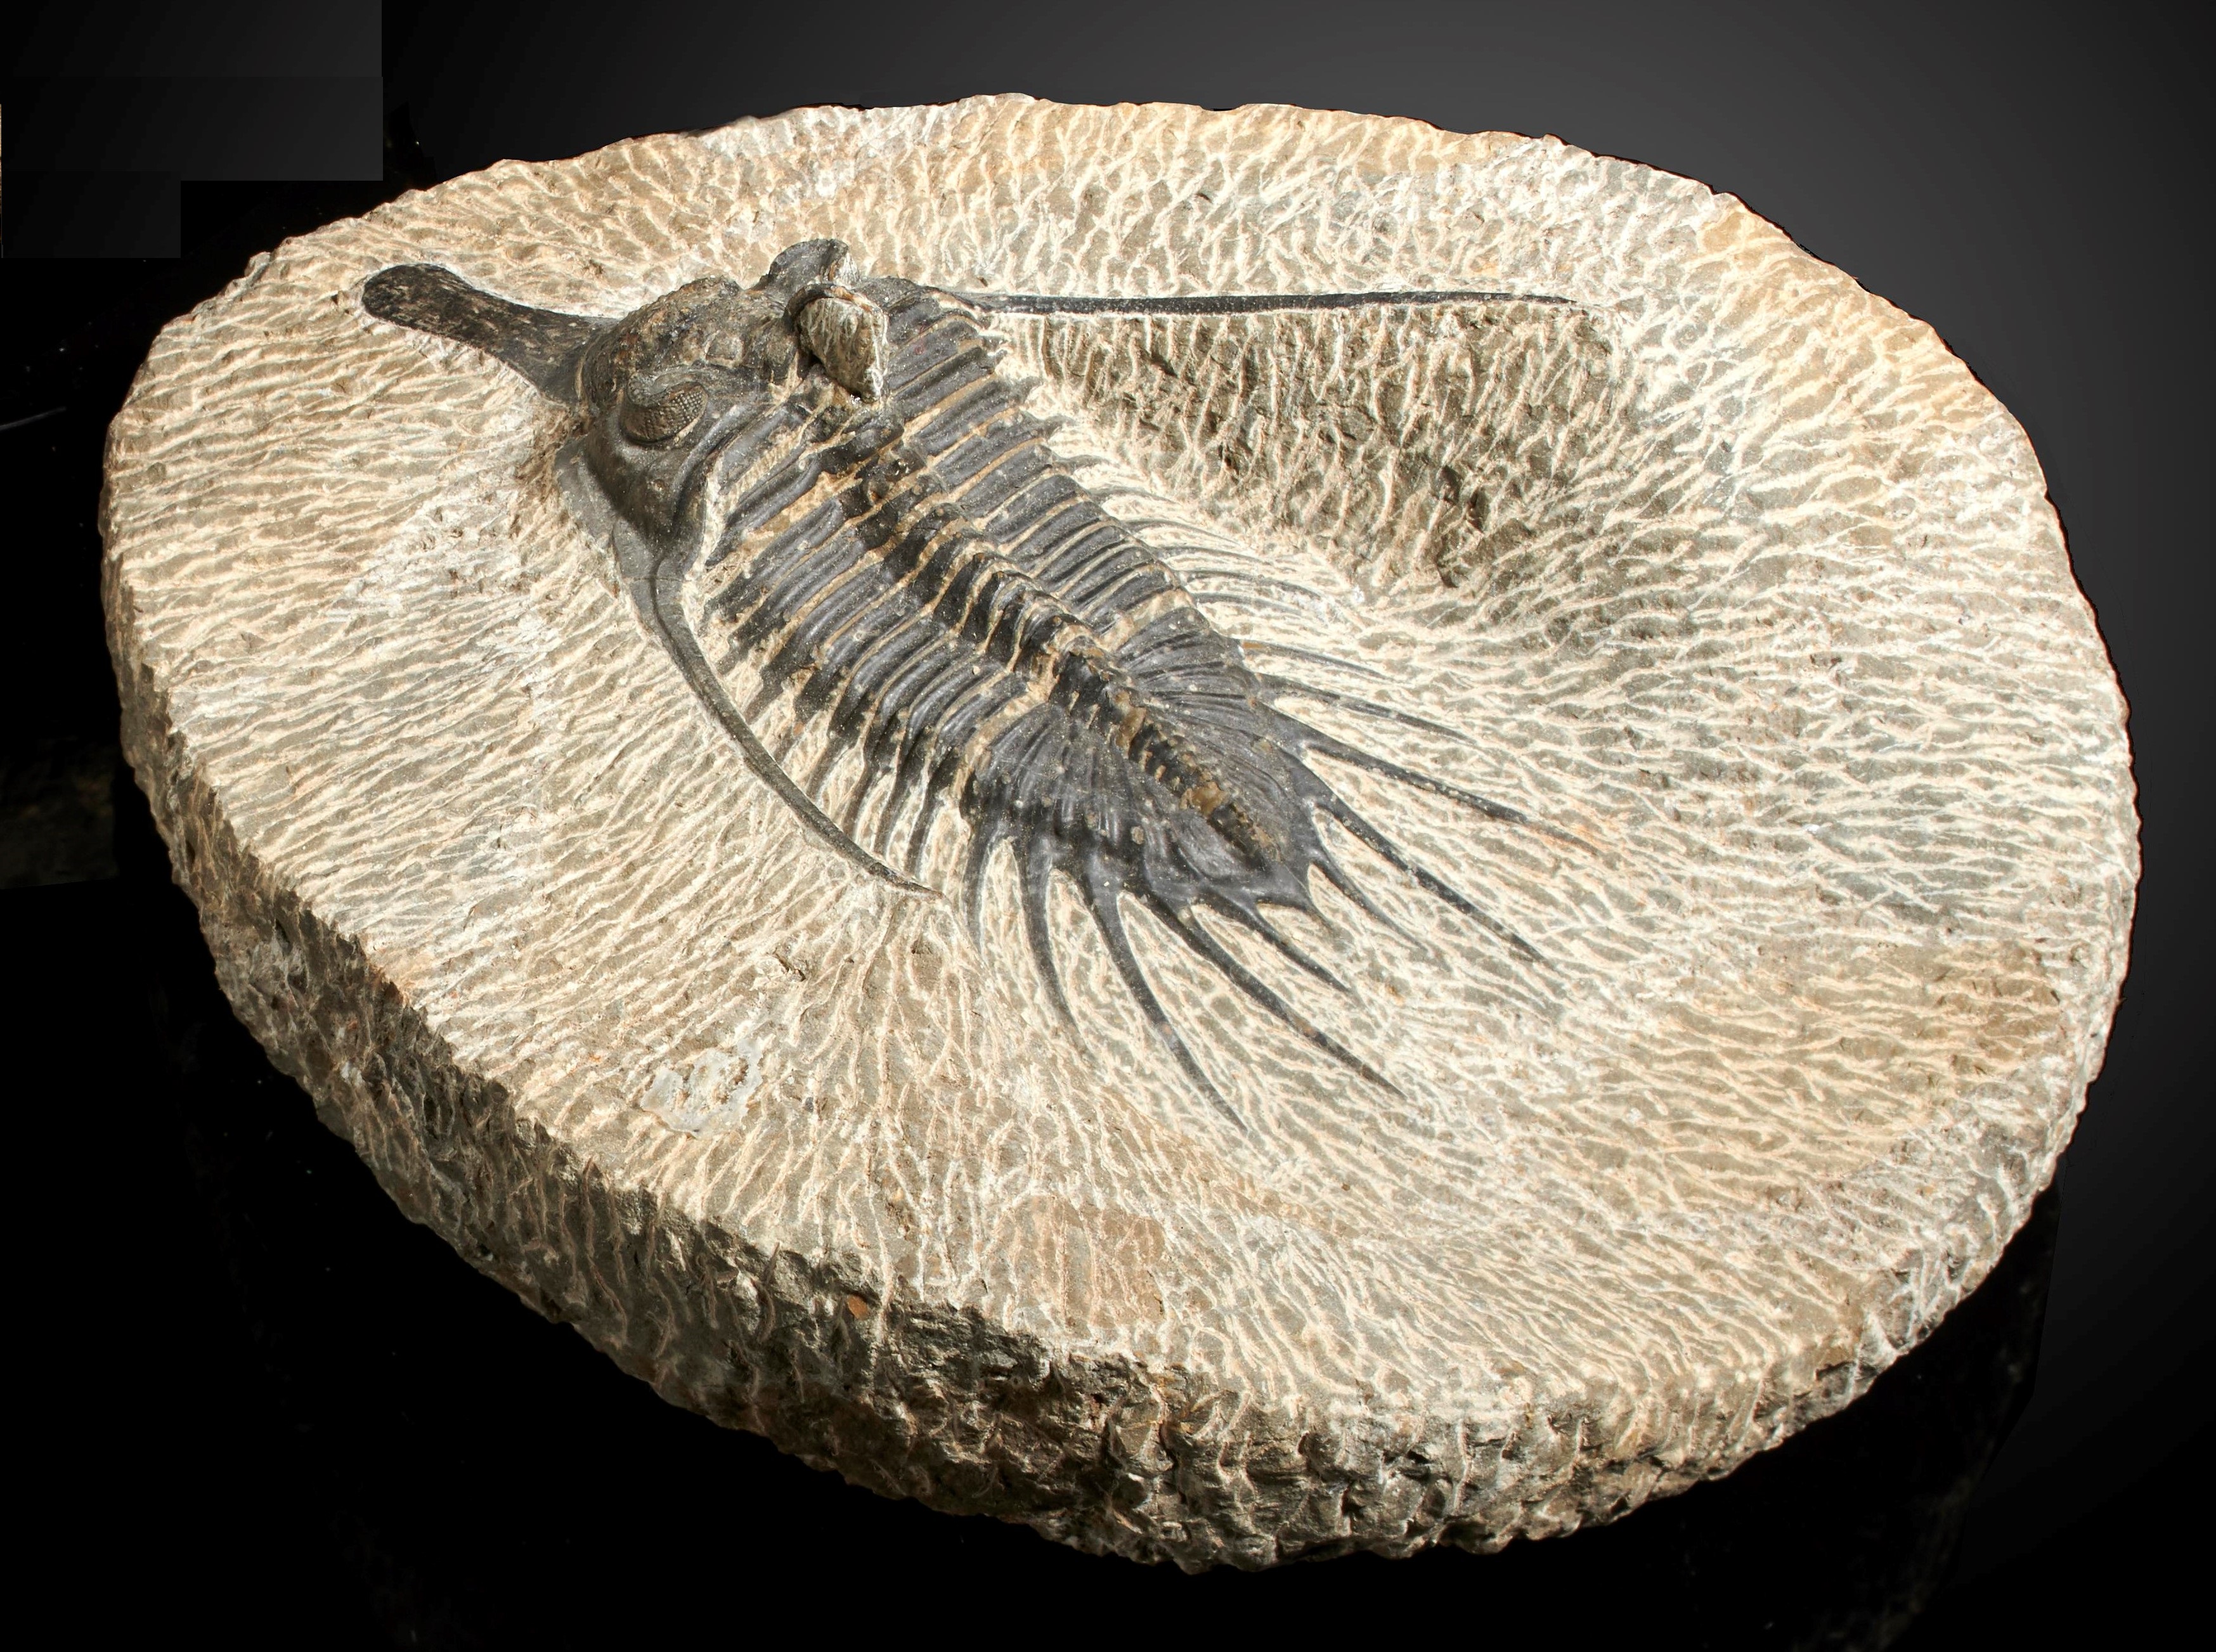 A psychopyge spp. trilobite Morocco, Devonian 16cm overall 